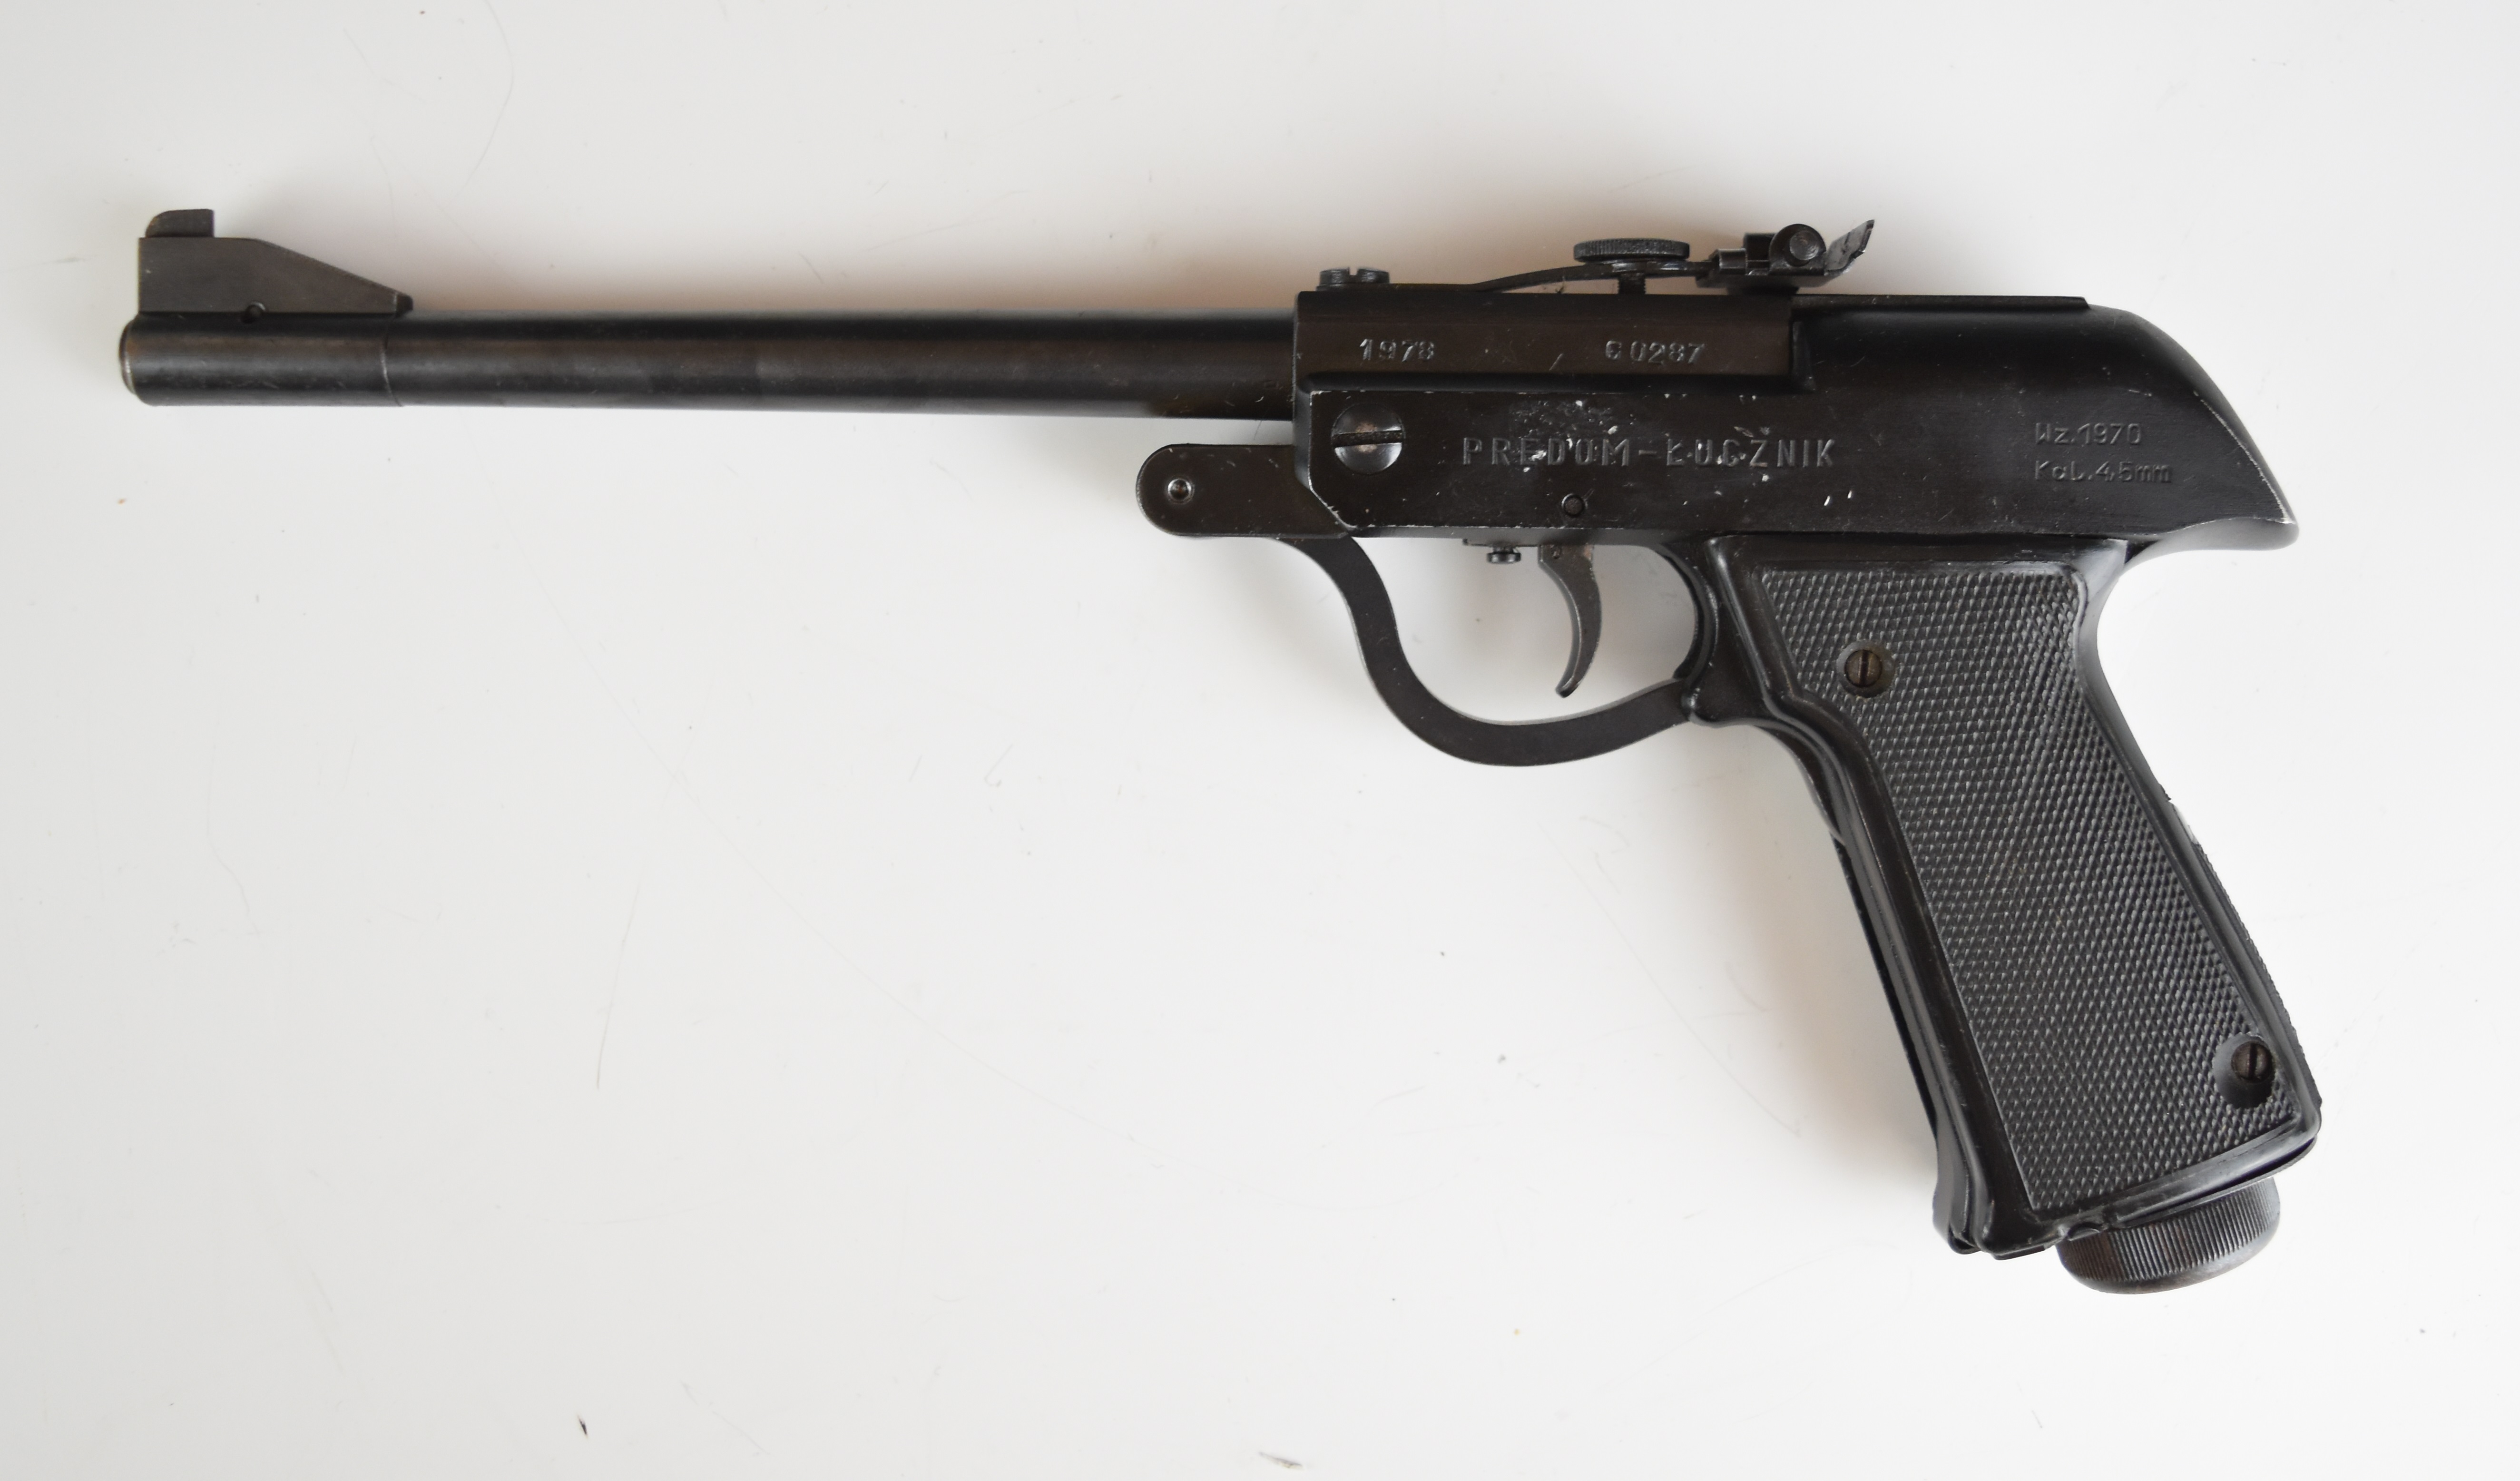 Polish Predom Lucznik model 1970 .177 Polish Army training target air pistol dated 1978 with - Image 2 of 12